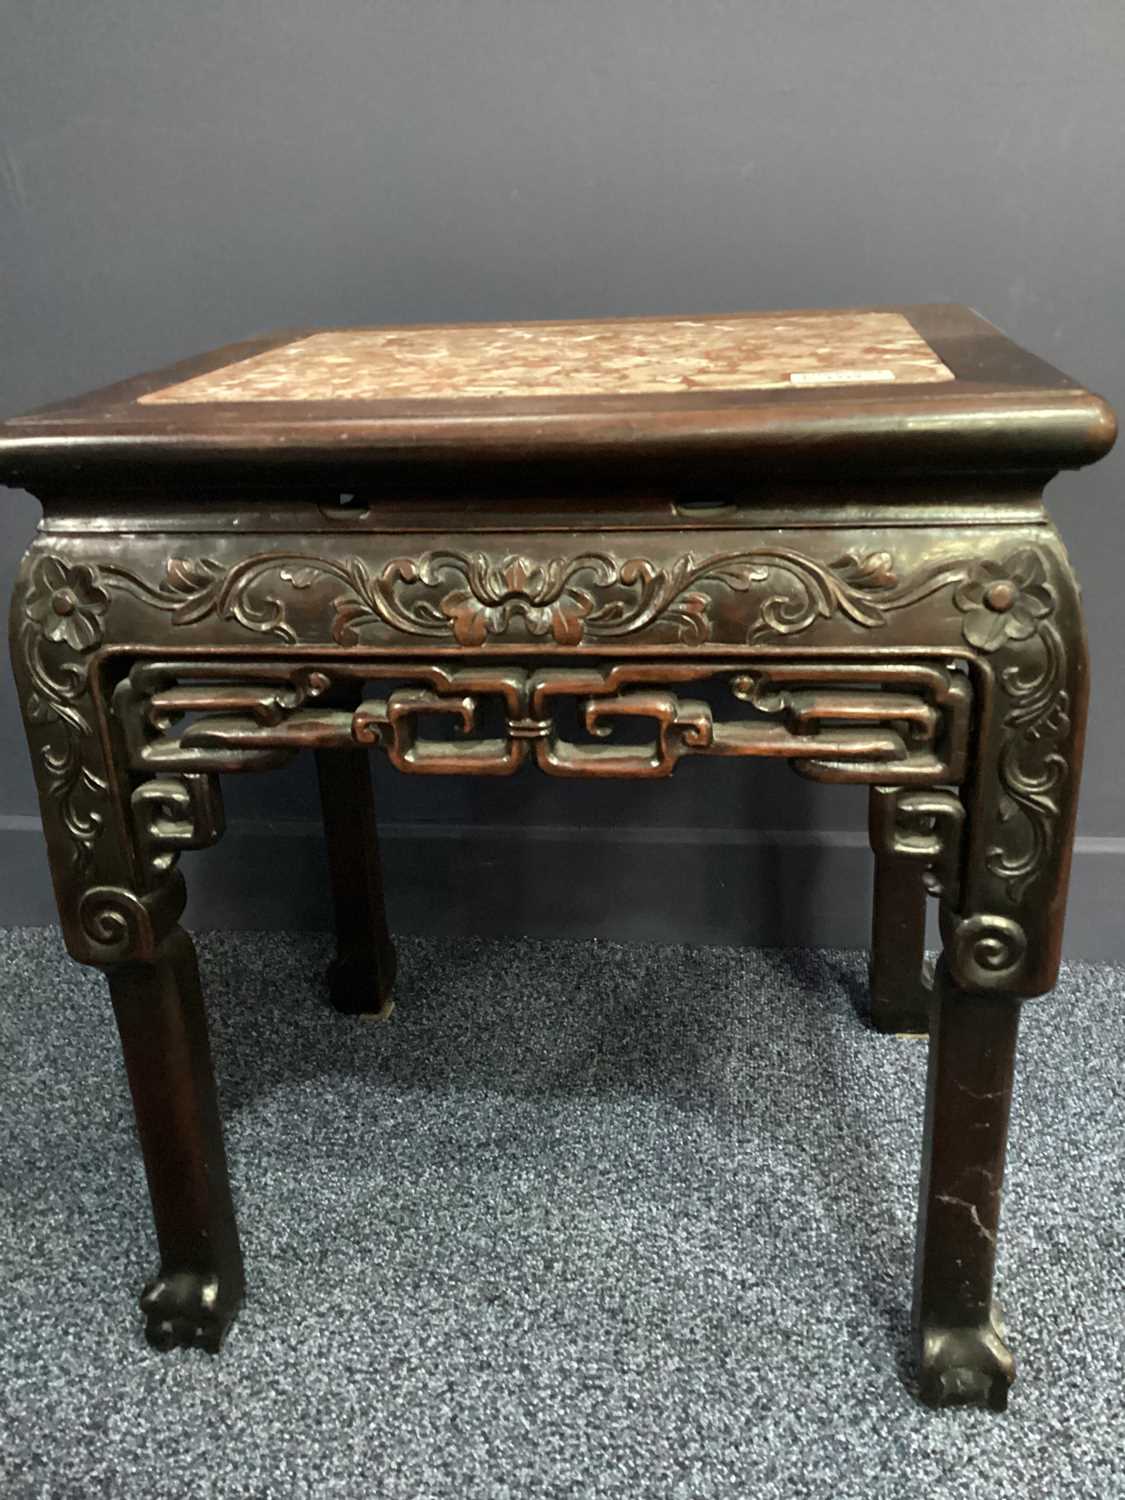 CHINESE HARDWOOD SIDE TABLE, LATE 19TH/EARLY 20TH CENTURY - Image 3 of 7